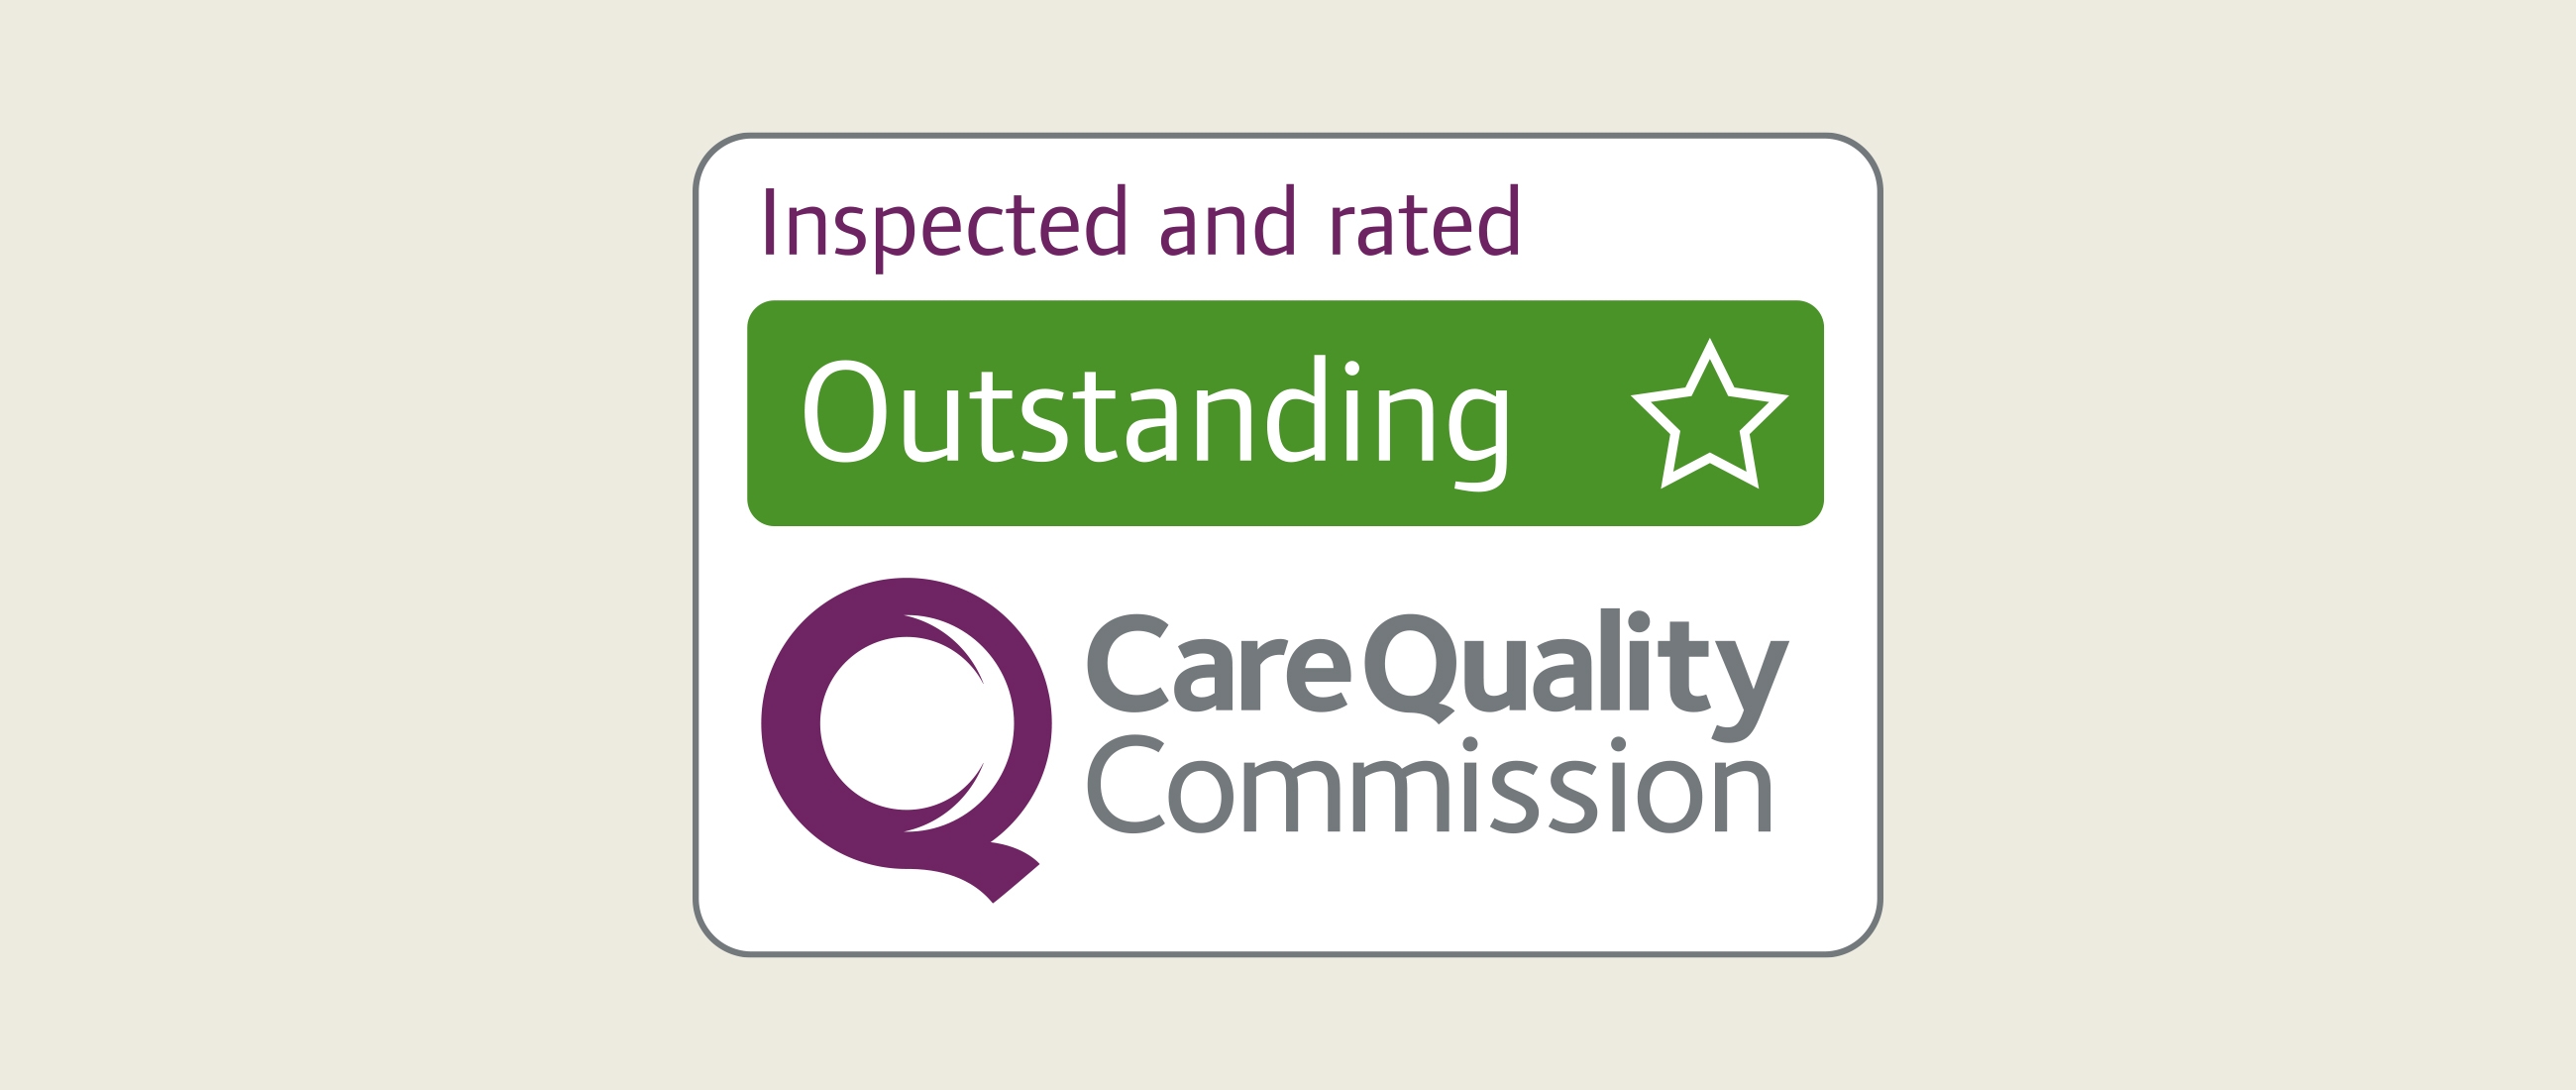 Enviva Care hailed as ‘outstanding’ for the second time by the CQC